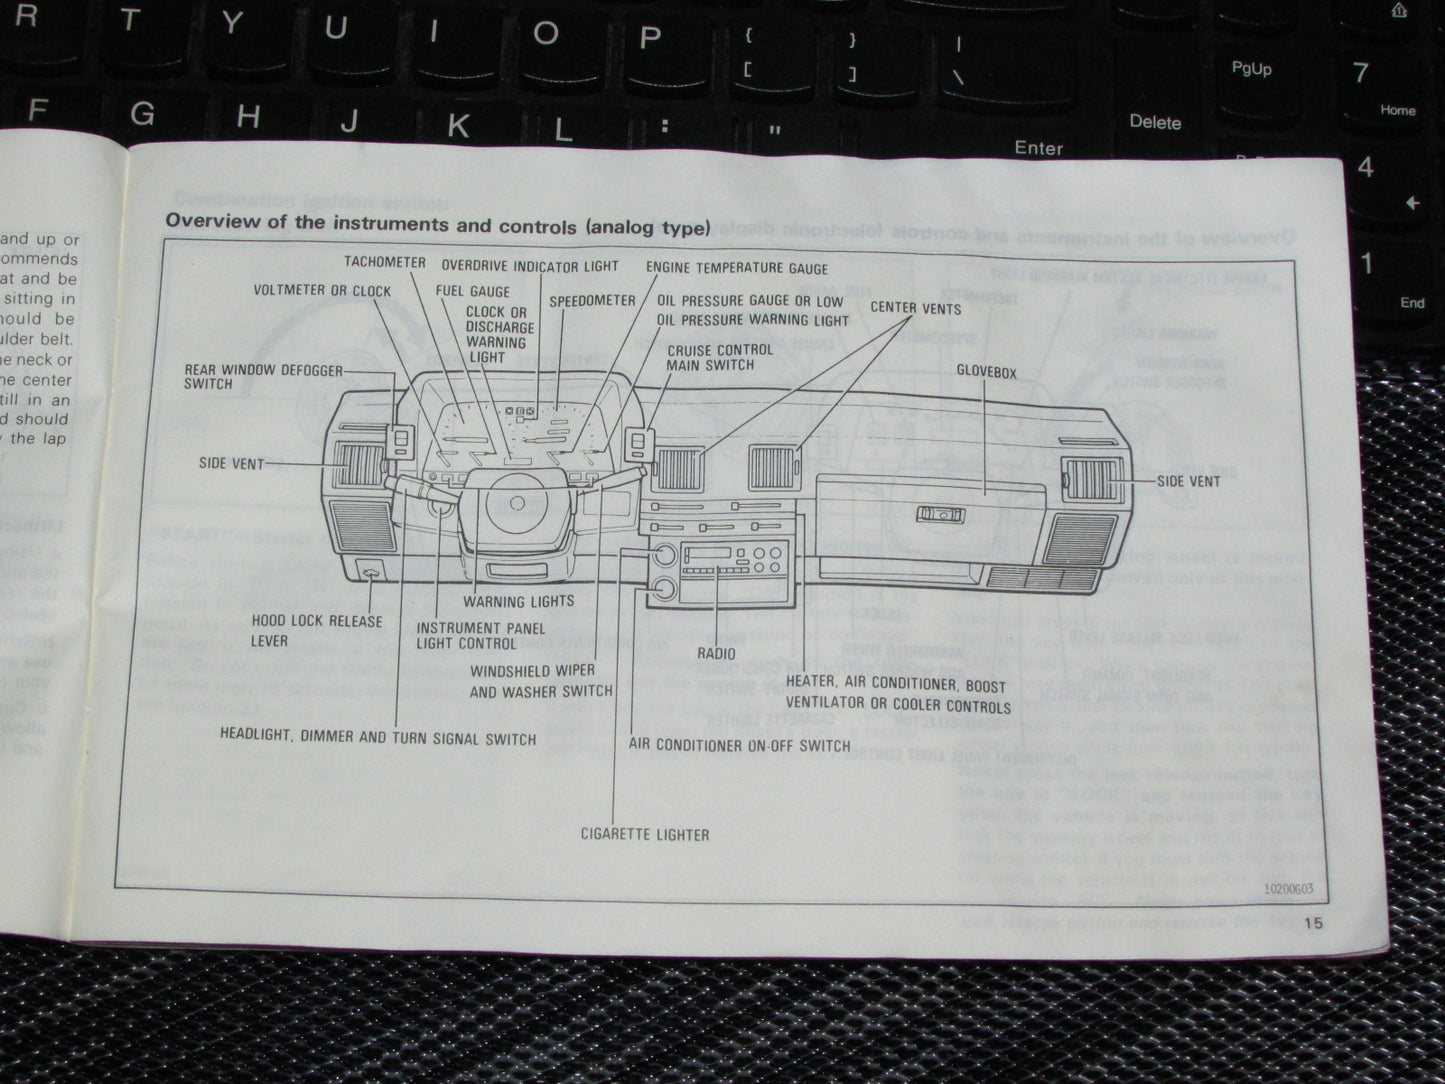 Toyota Celica (1985) Owners Manual